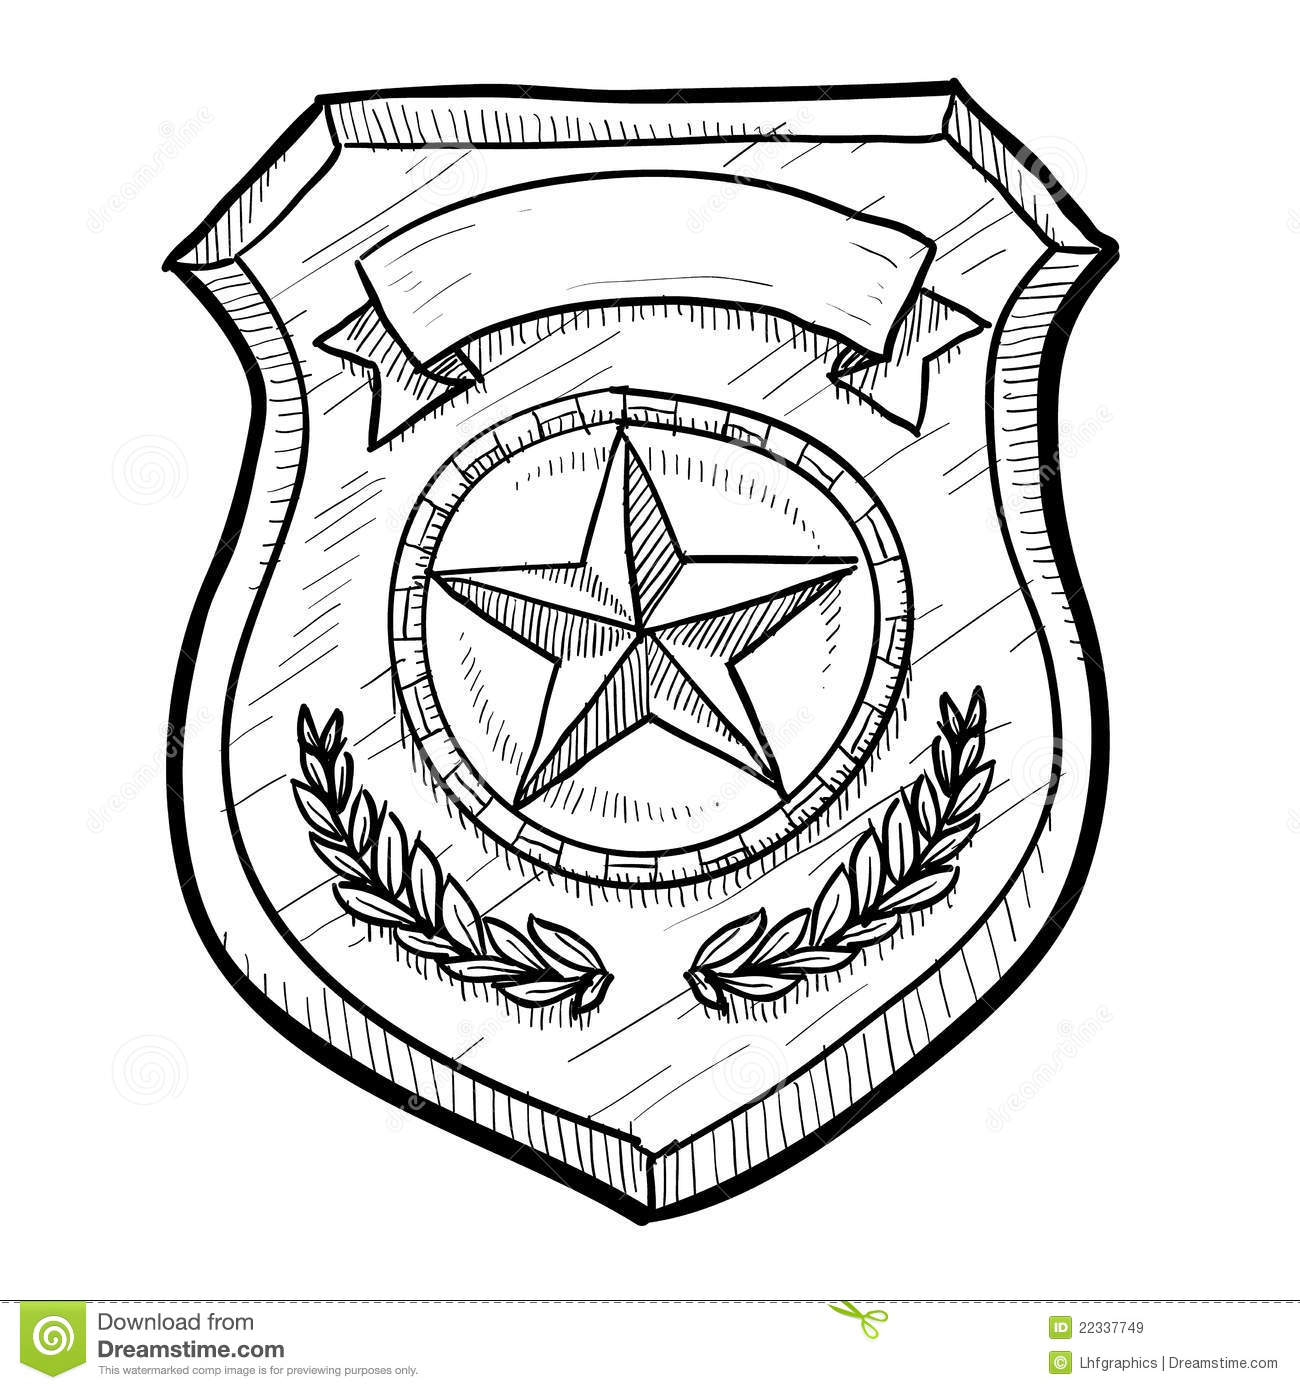 Doodle Style Police Or Firefighters Badge Vector Illustration With